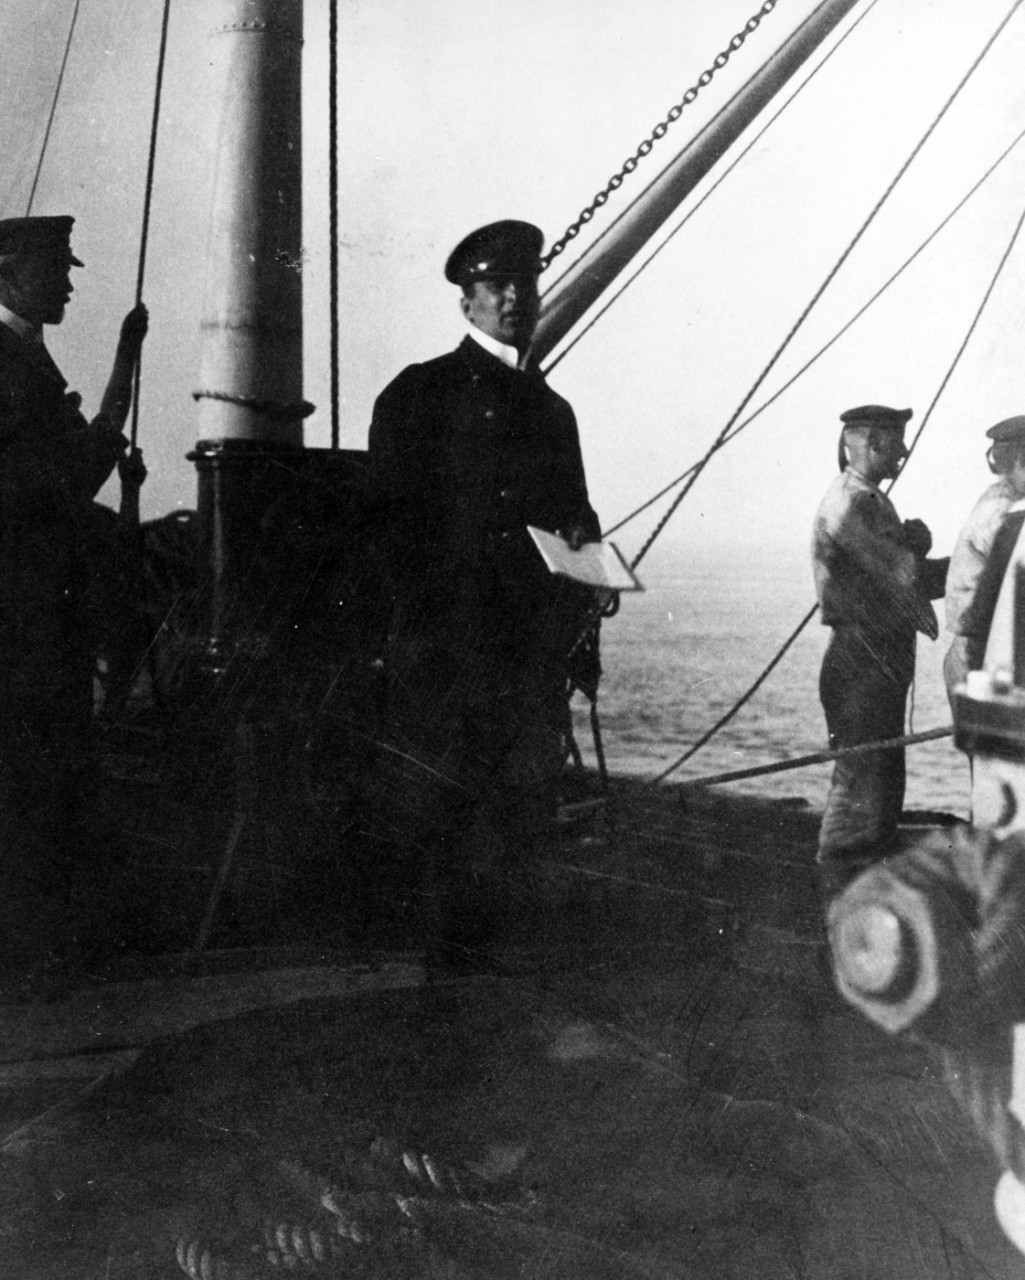 German naval officers and seamen, probably aboard a naval auxiliary in action in about 1914-1916